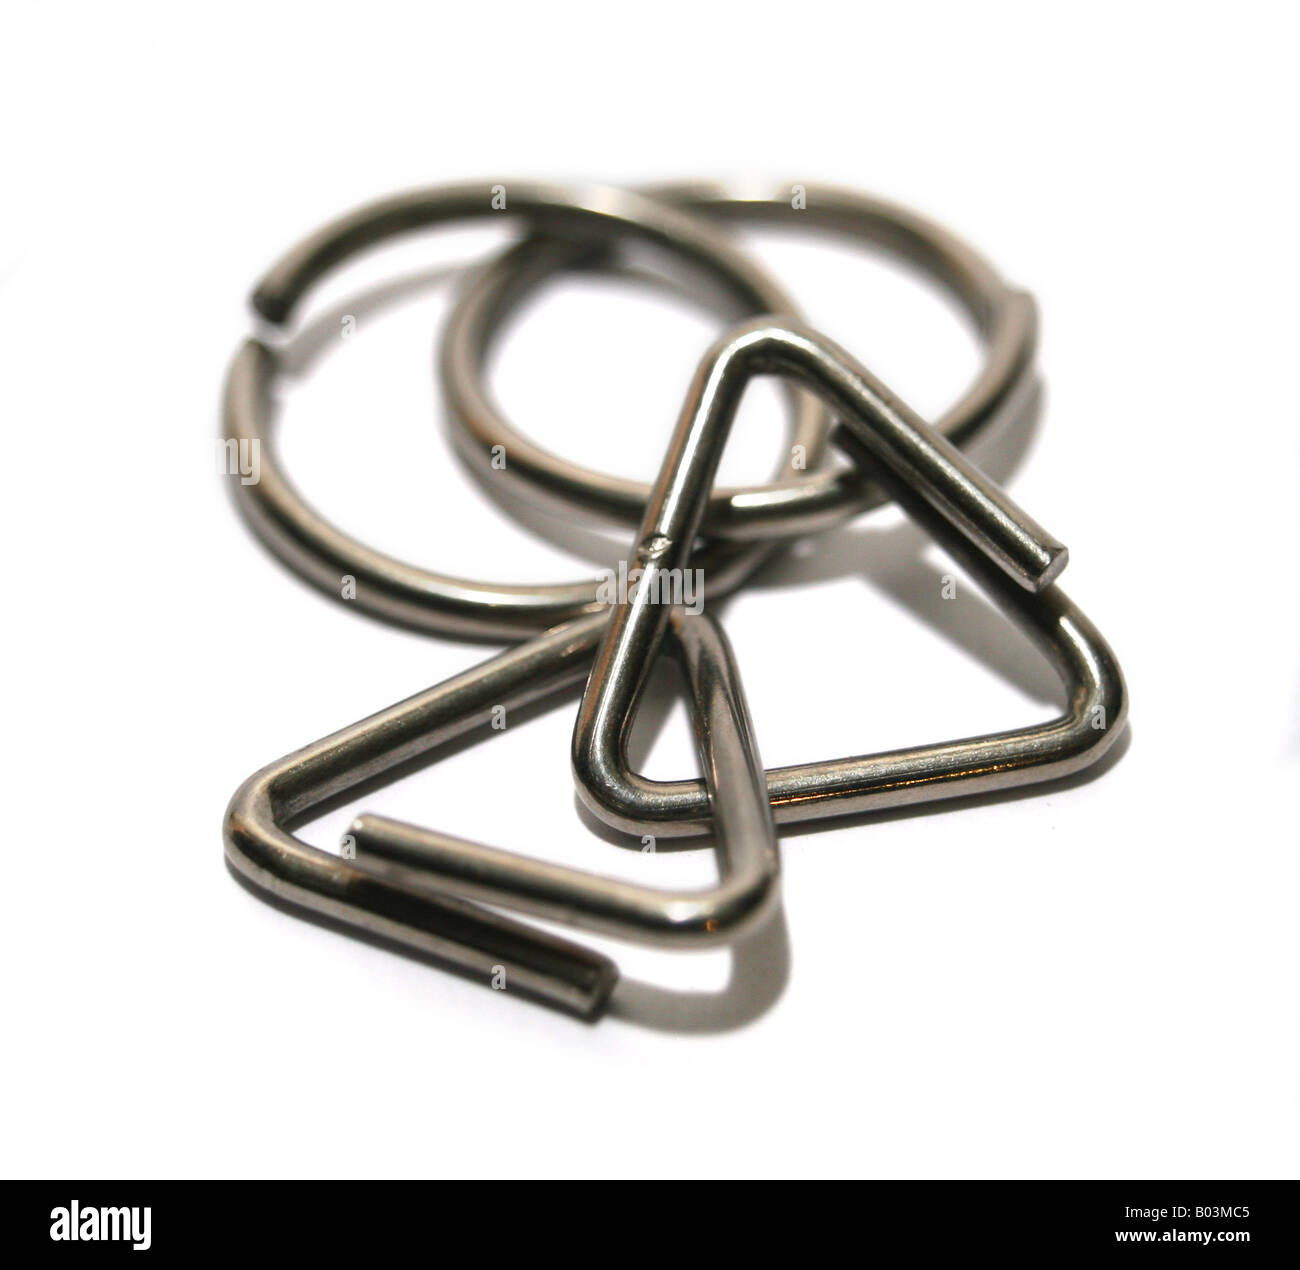 Dexterity ring puzzles, close up. Stock Photo